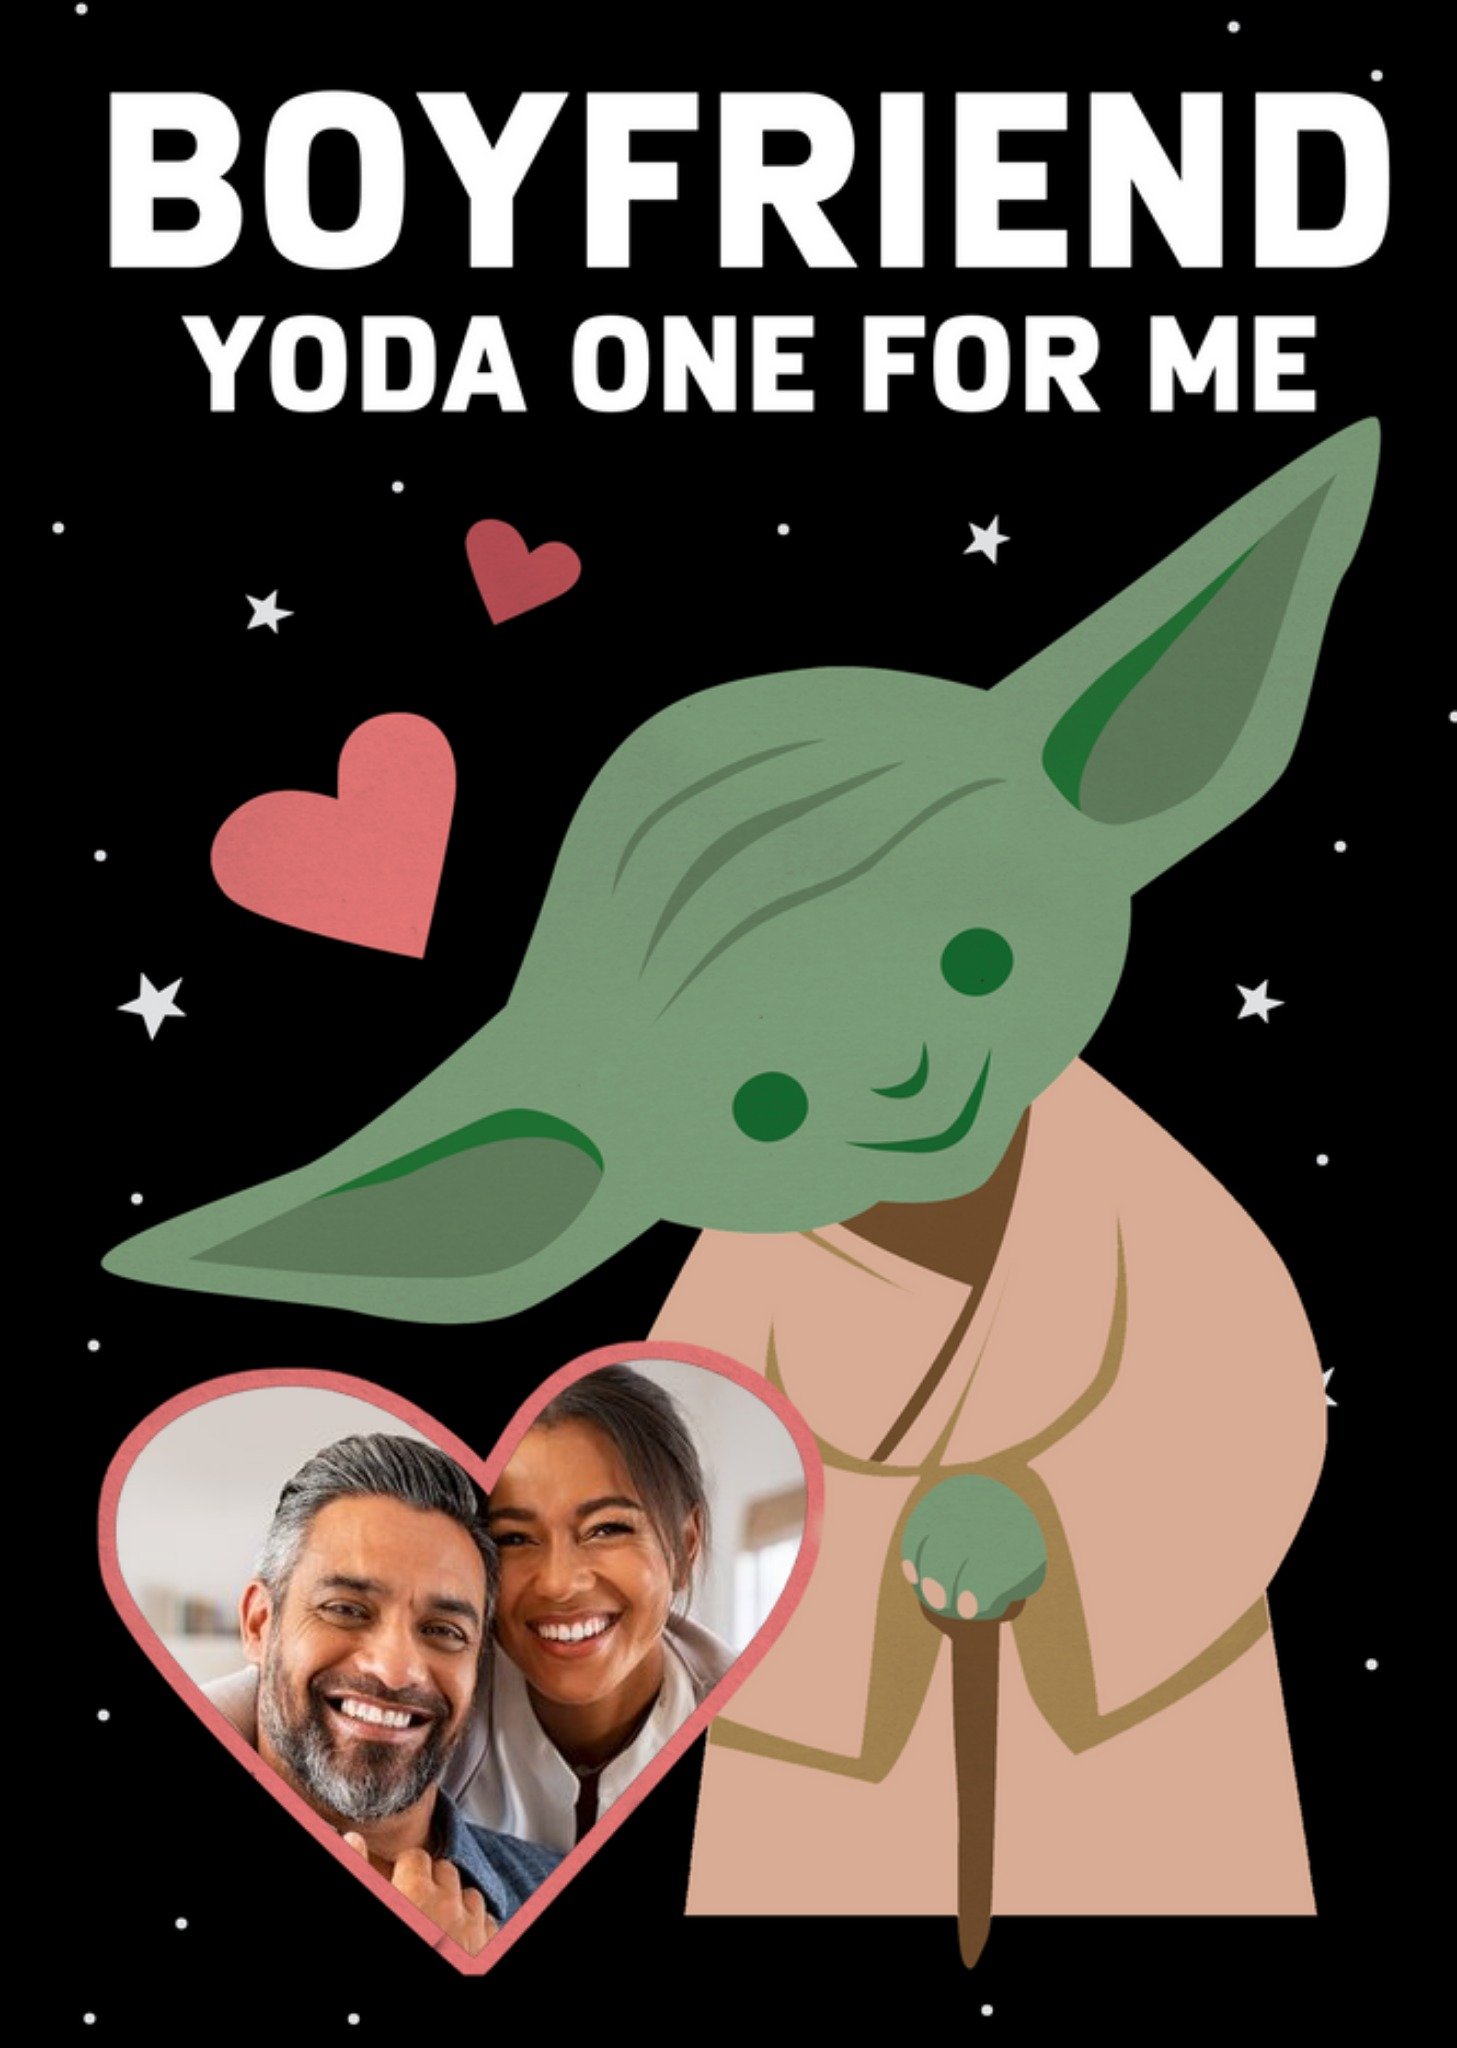 Disney Star Wars Cute Yoda One For Me Valentines Day Card, Large